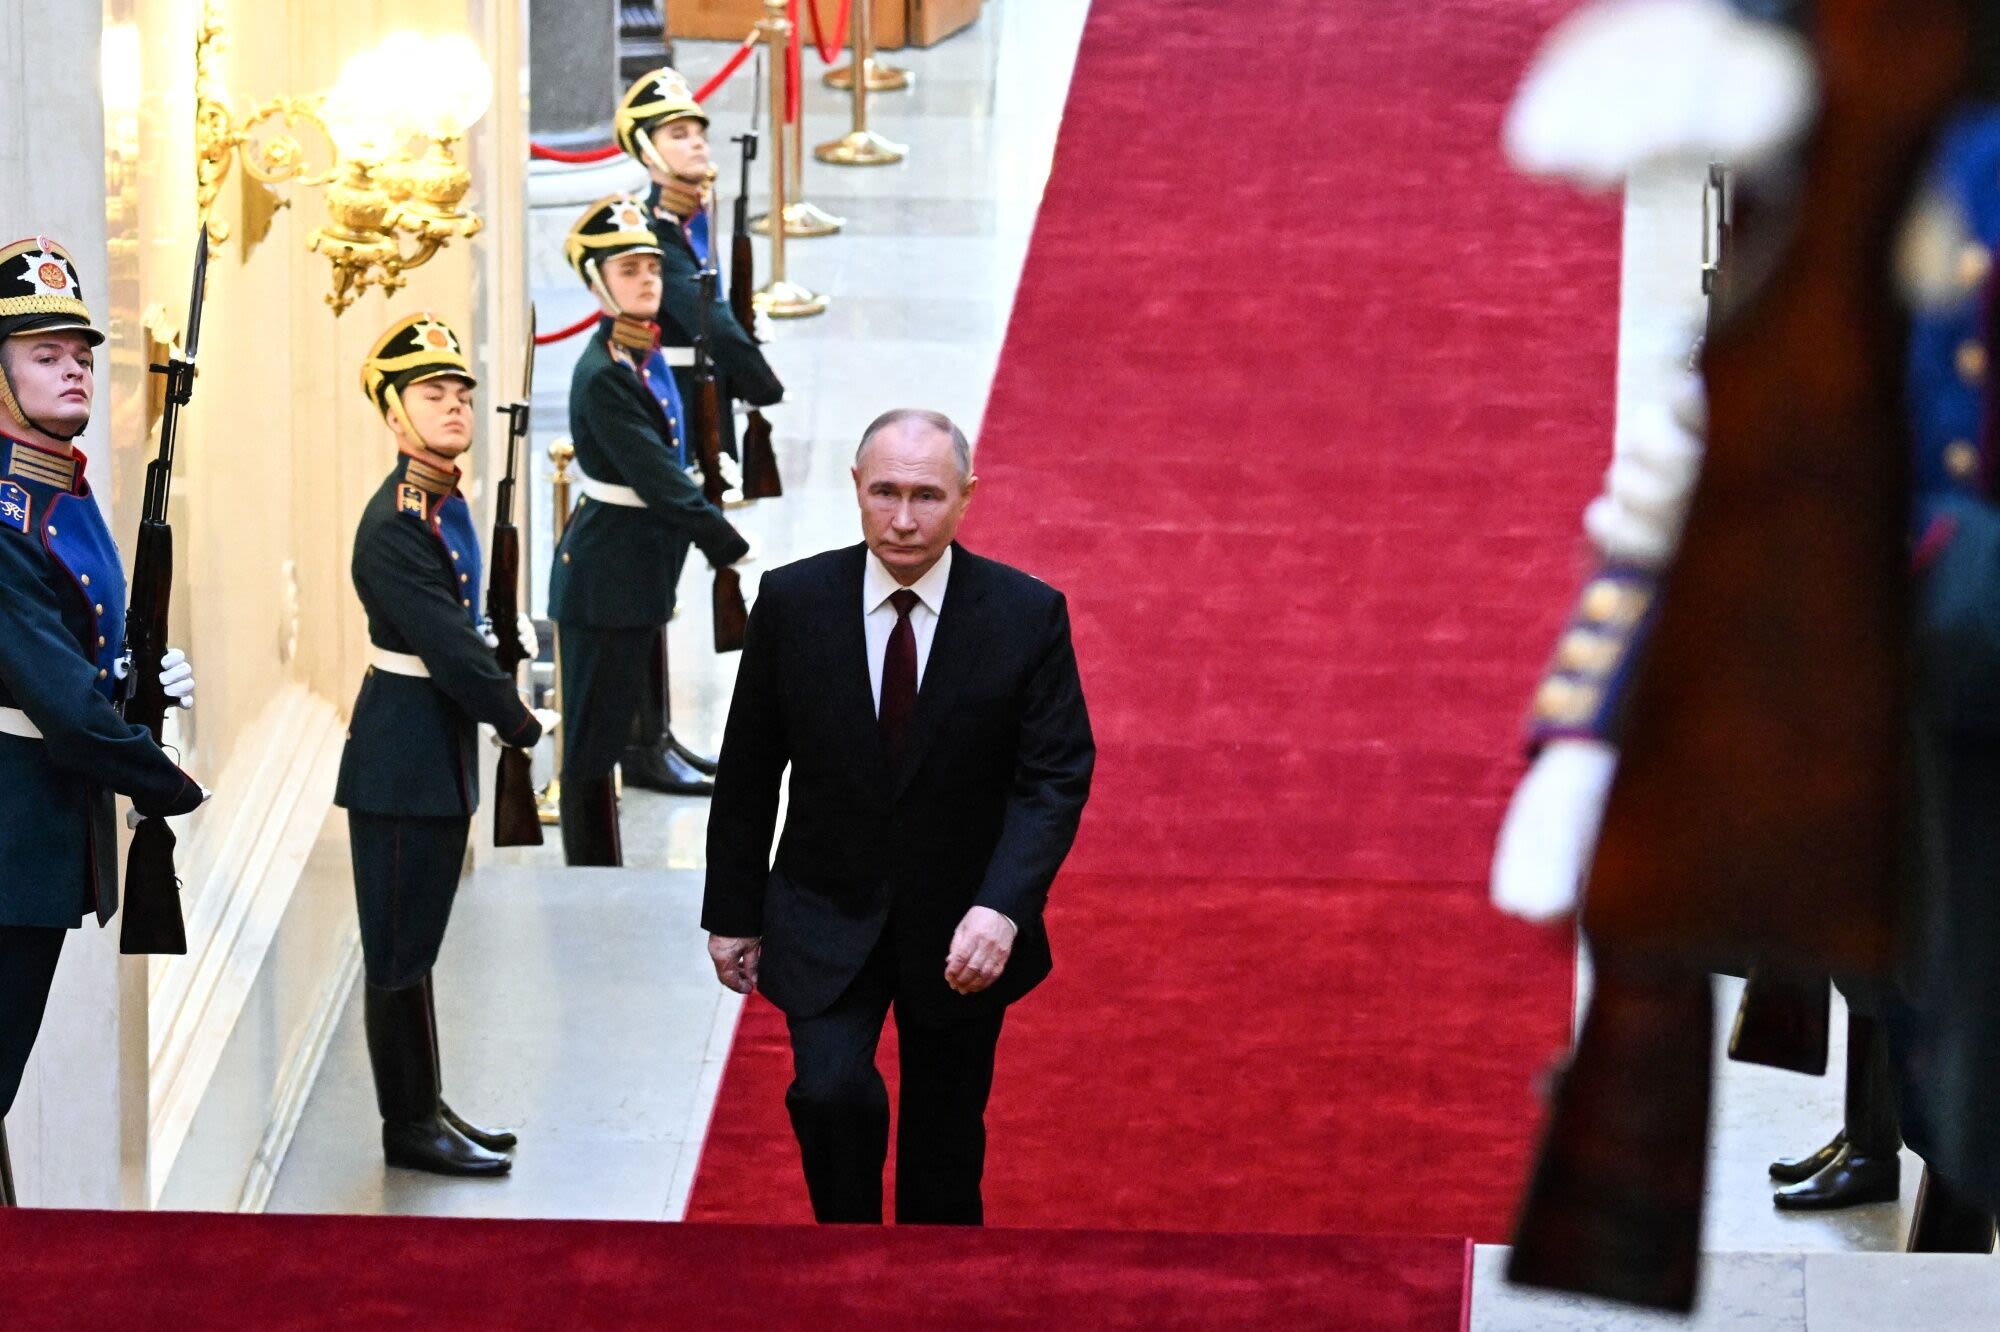 Putin Sworn In for New Term Amid Growing Conflict With West